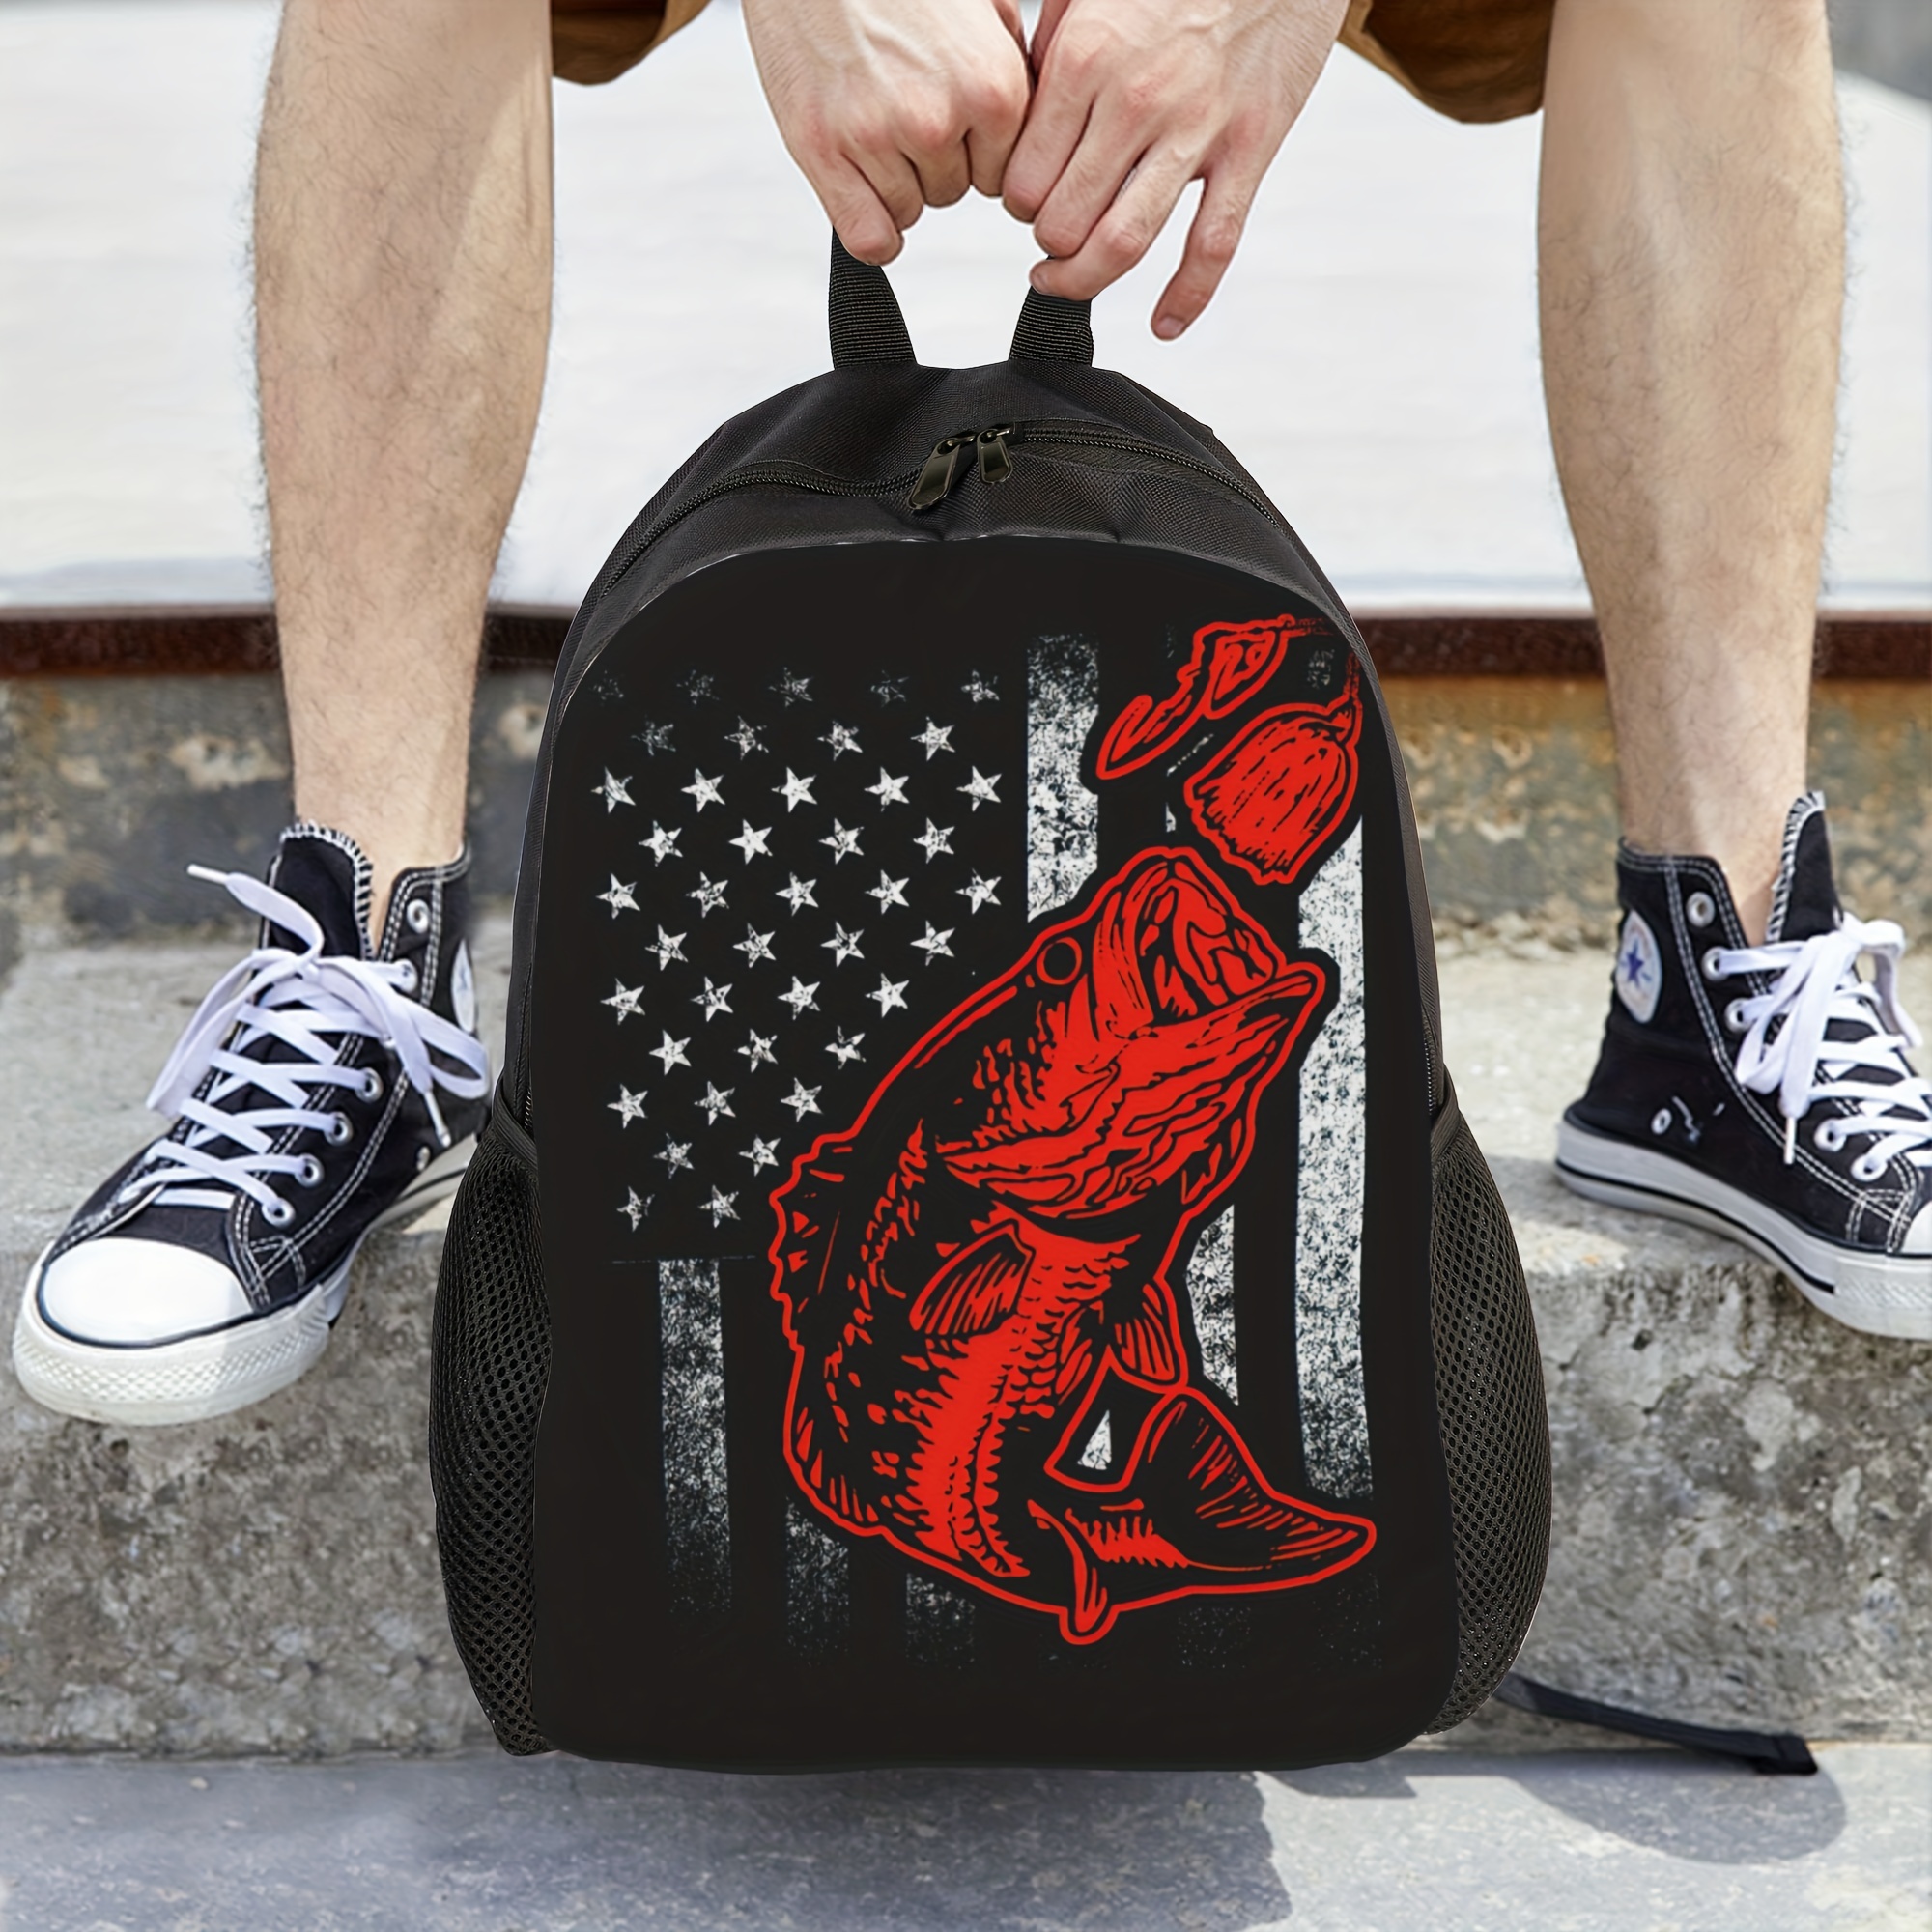 Bass Fish Lures And American Flag Casual Backpack, School Bag, Fashion  Lightweight Outdoor Backpack, Holiday Gifts